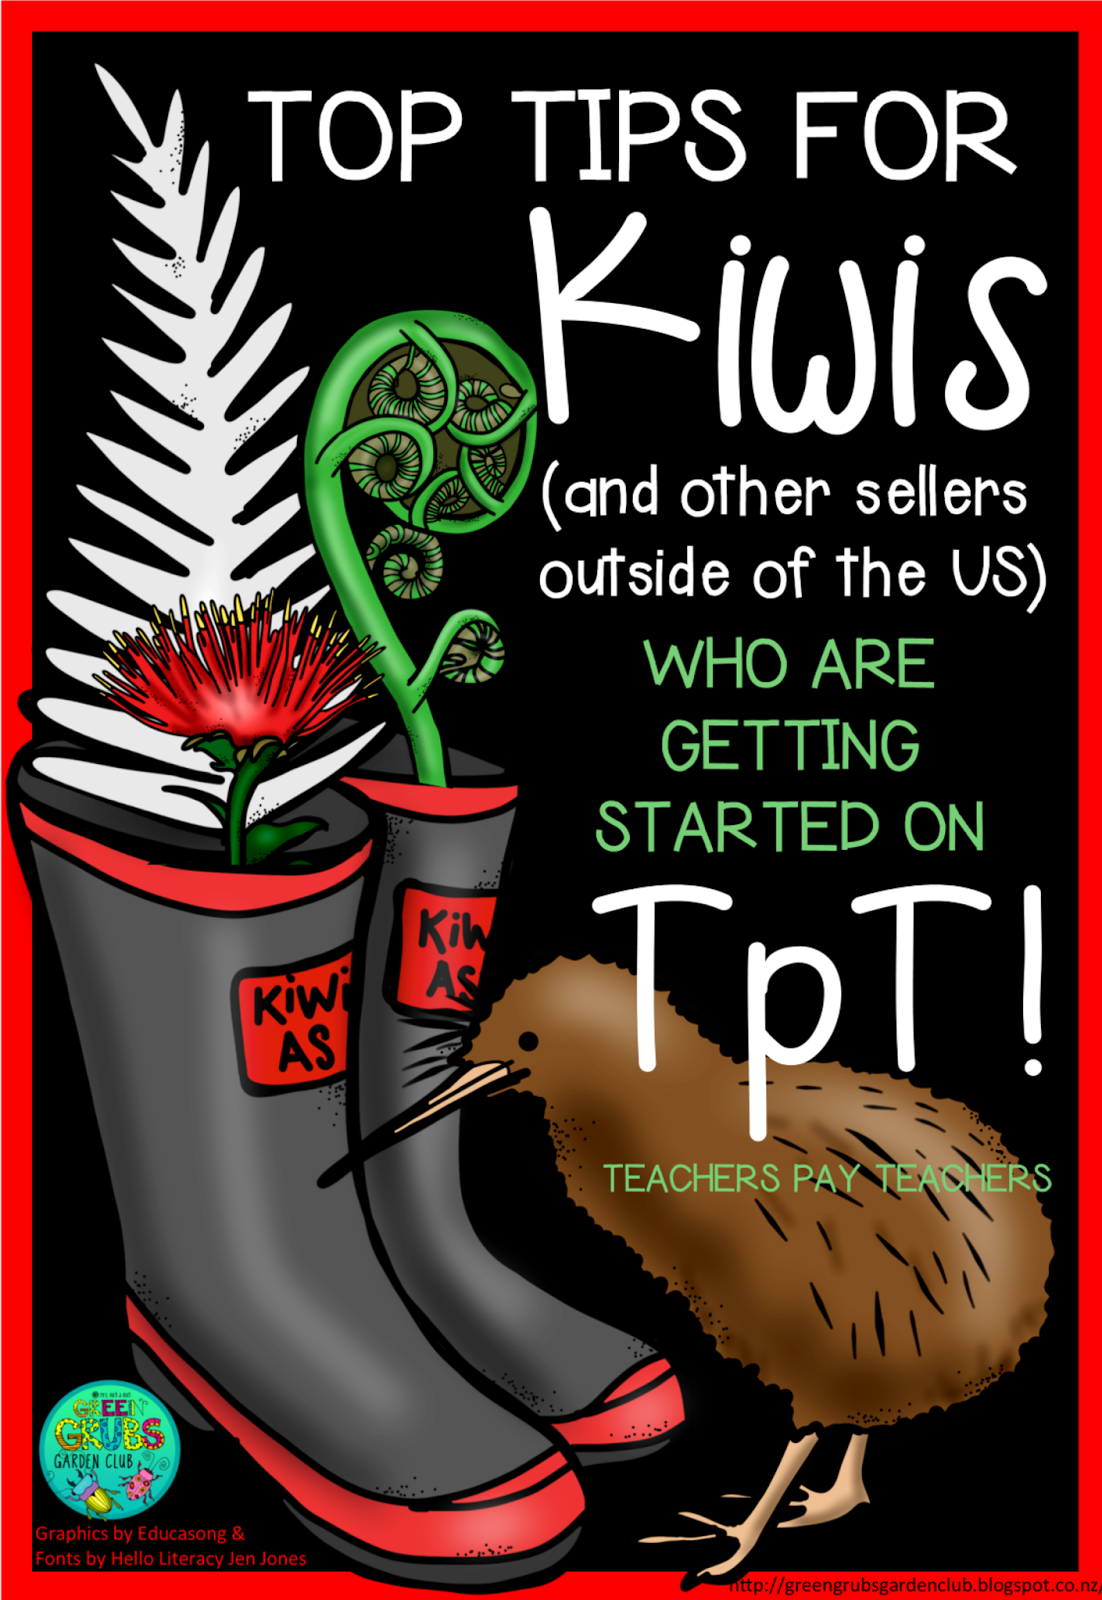 TOP TIPS FOR KIWIS GETTING STARTED ON TPT! (+ tips for sellers outside of the US)